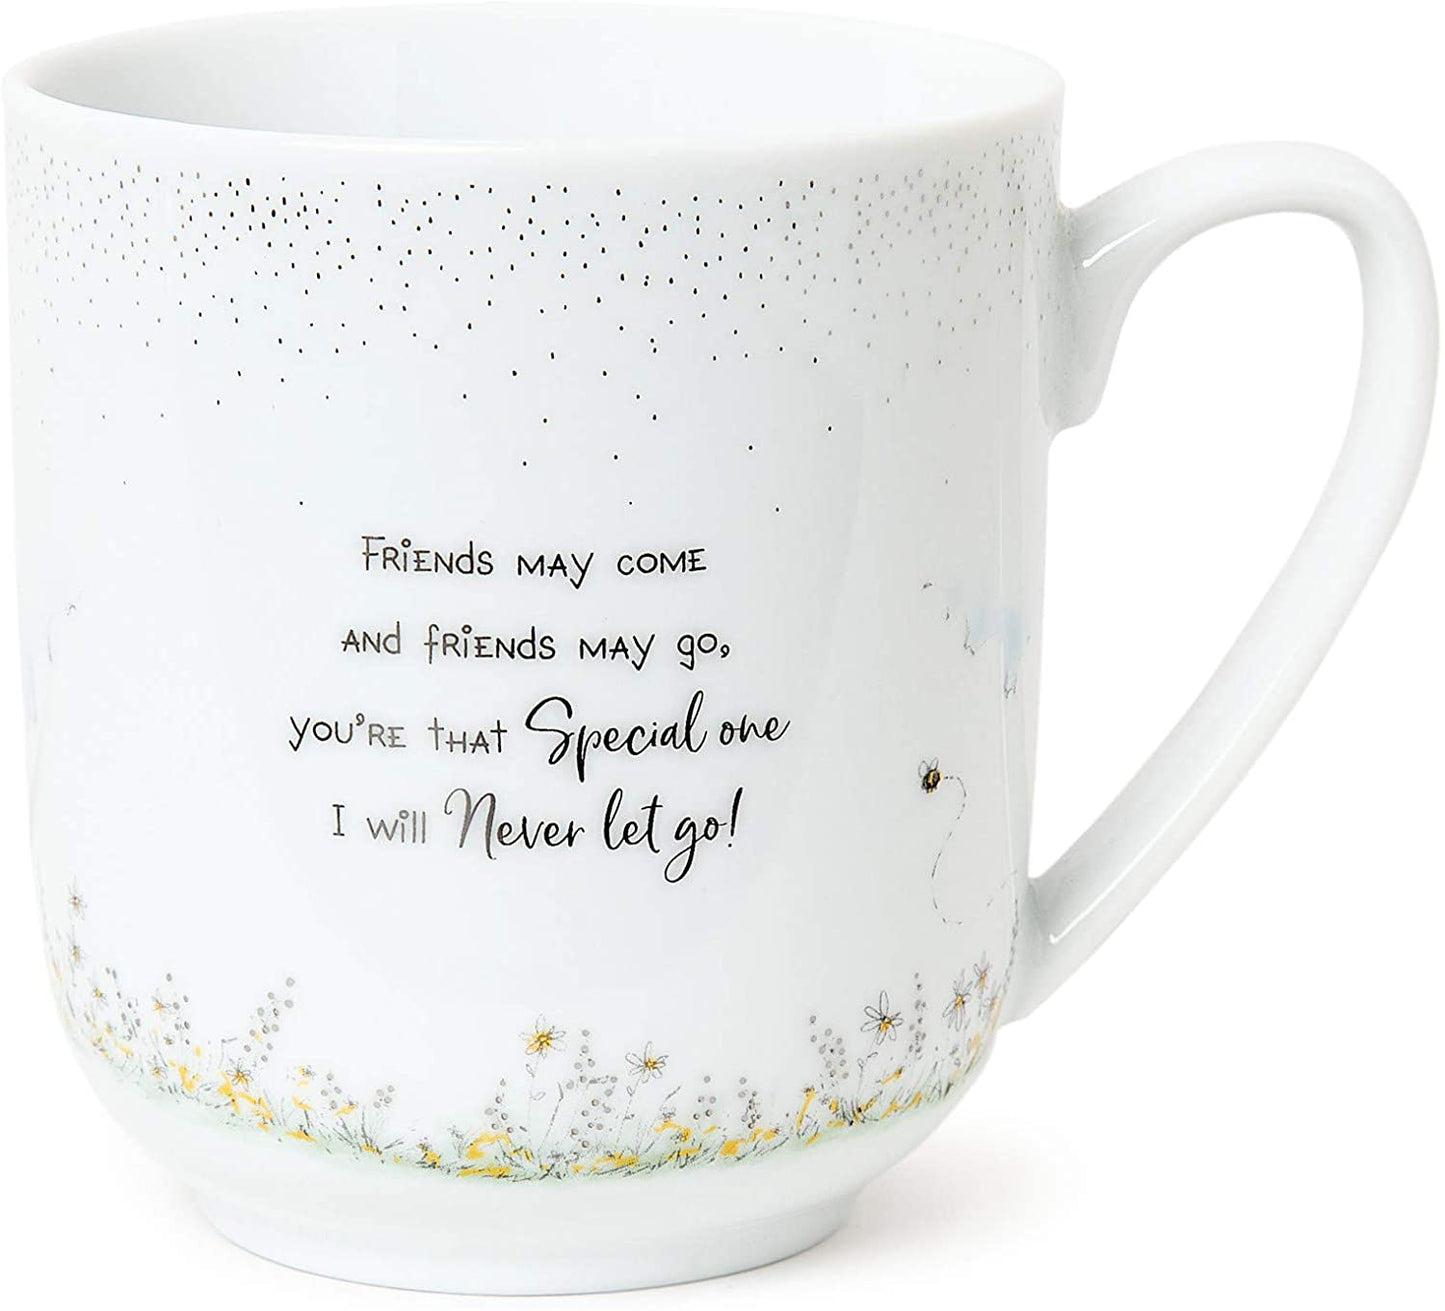 True Friend Signature Collection Me to You Bear Boxed Mug